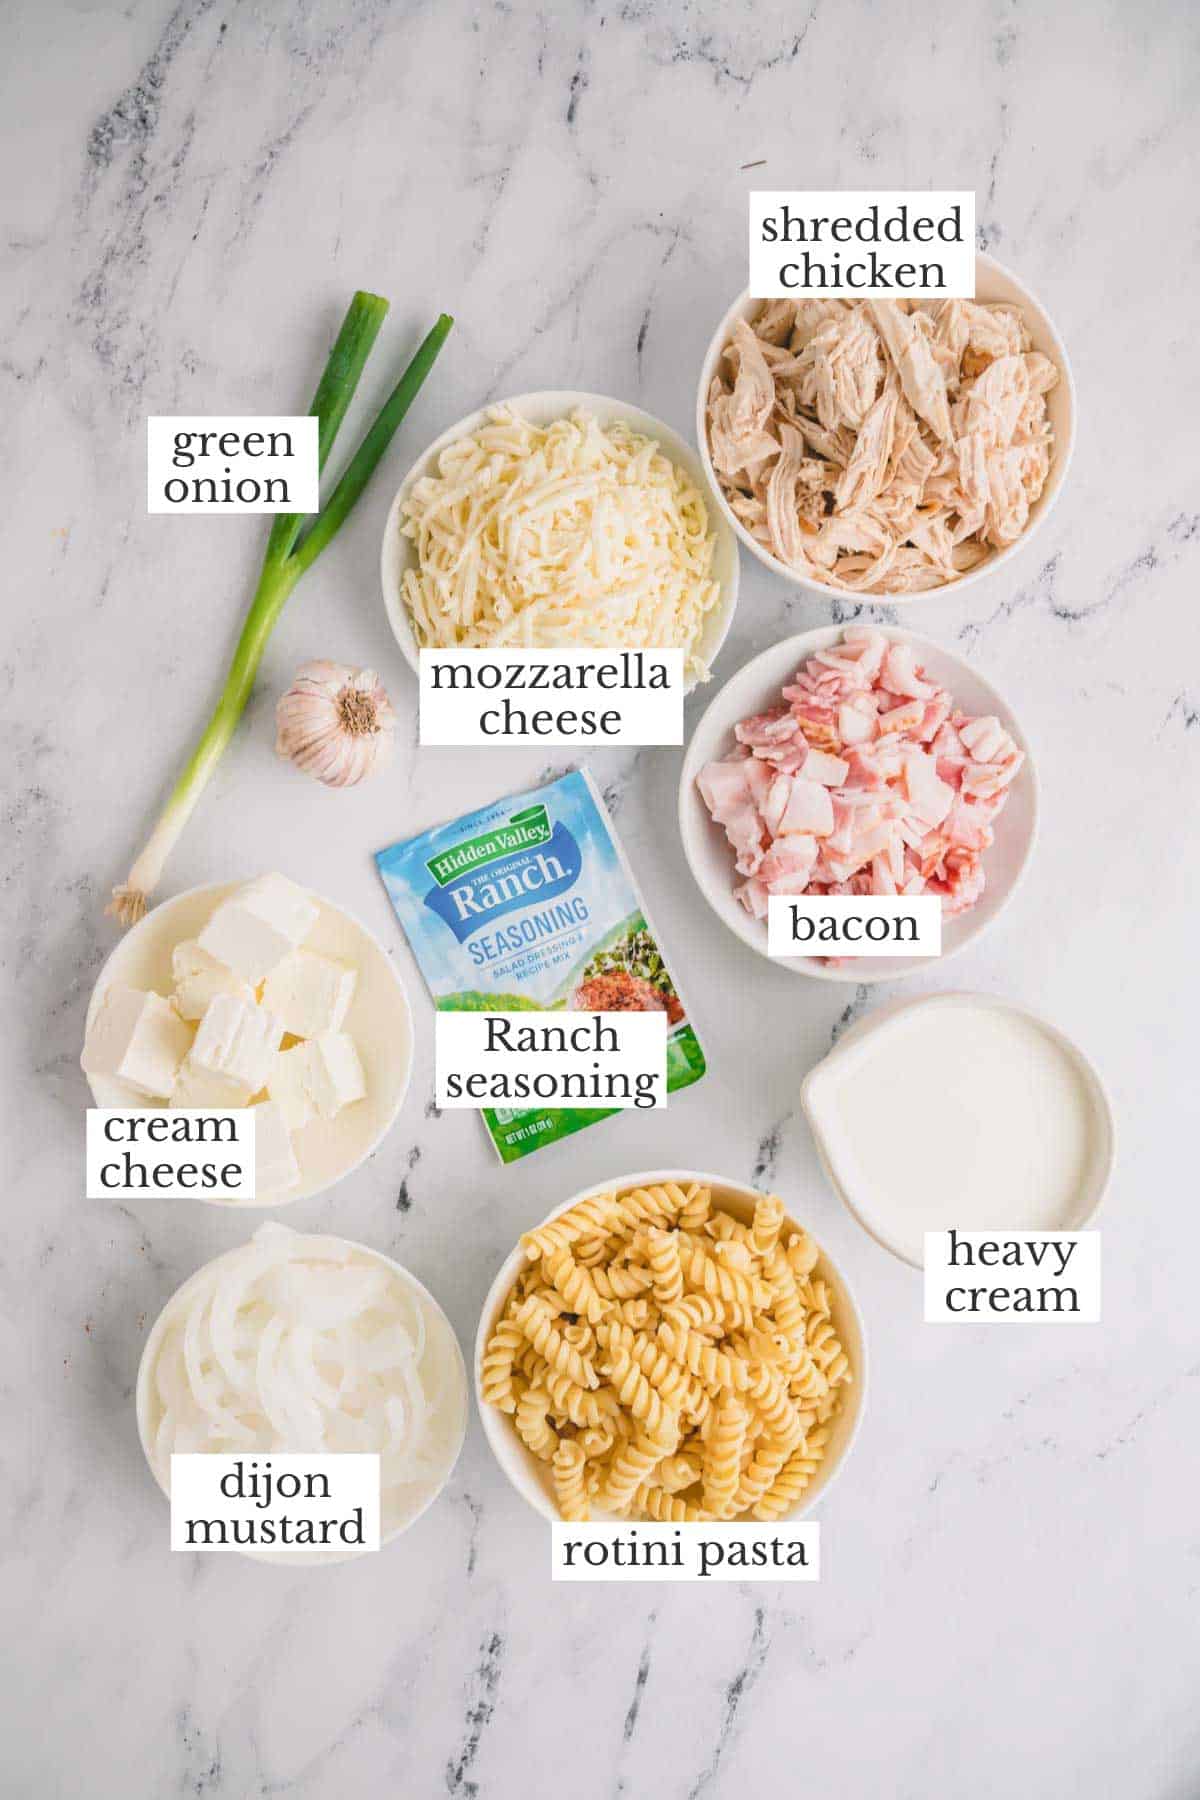 Ingredients to make chicken bacon ranch casserole with shredded chicken and rotini pasta.